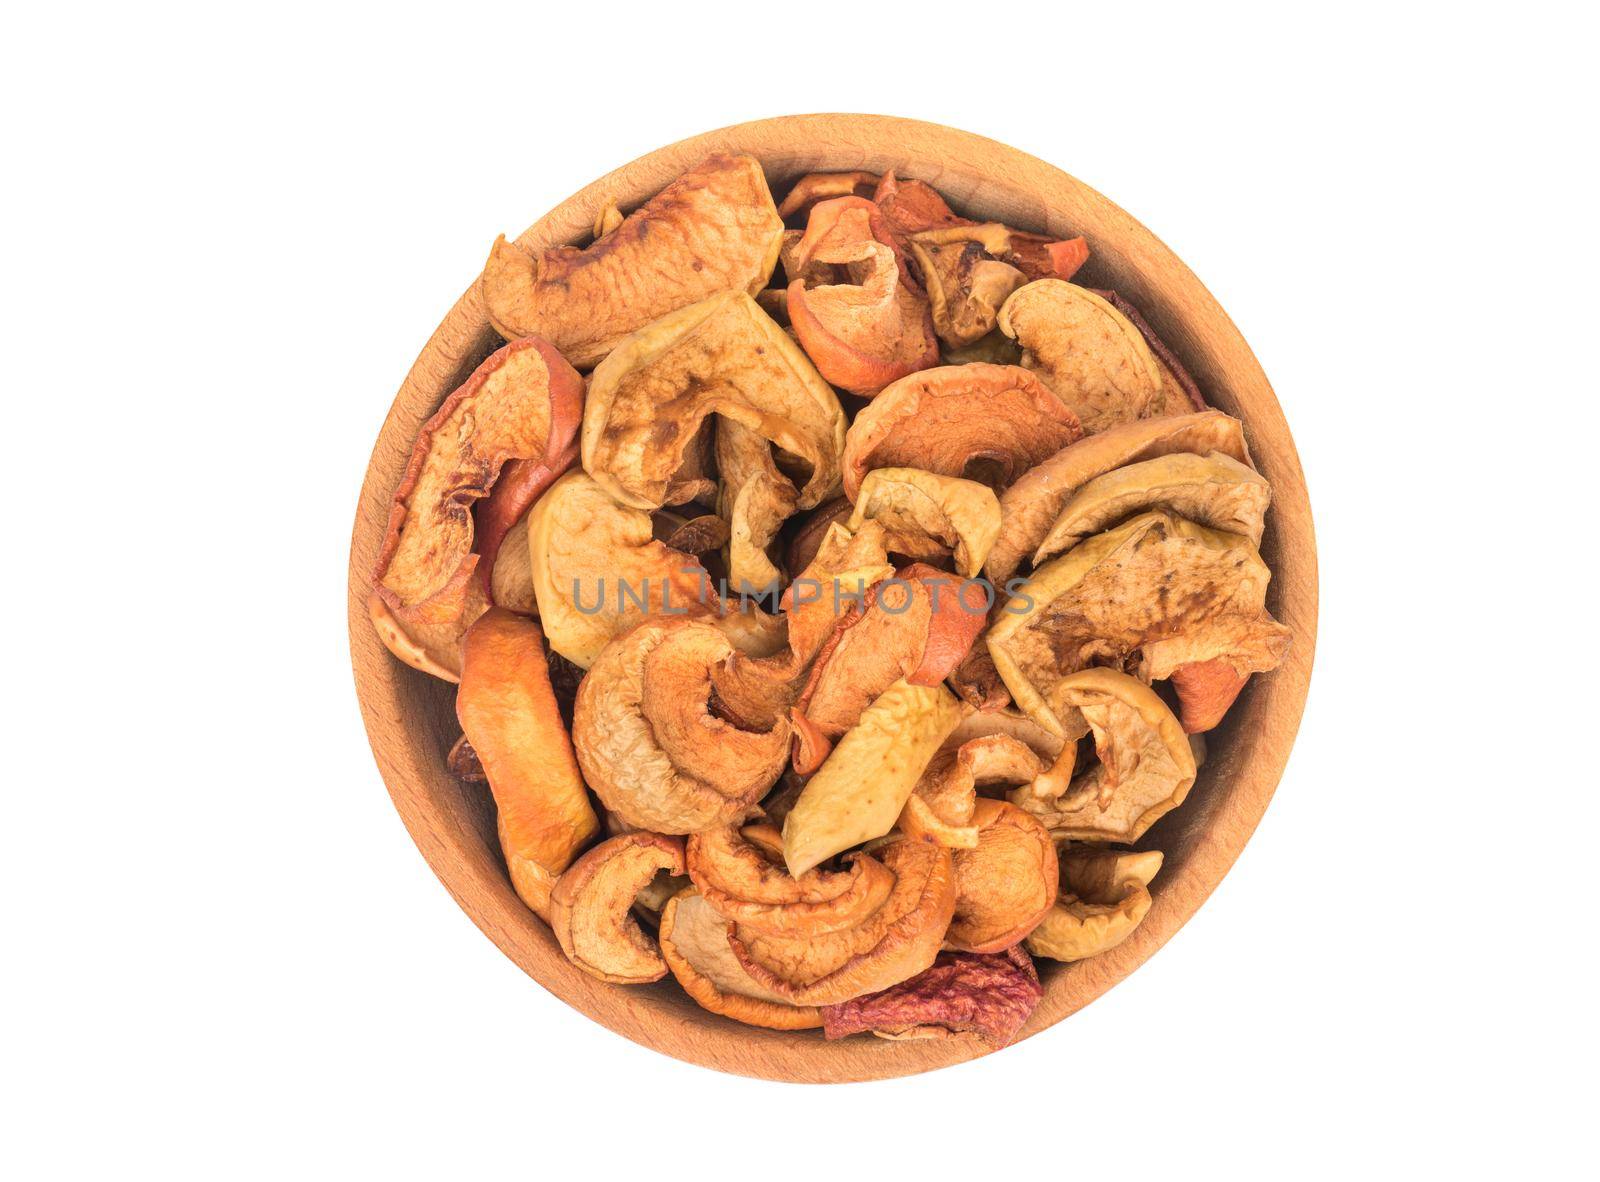 Slices of dry fruit apples in a bowl isolated on white background, top view